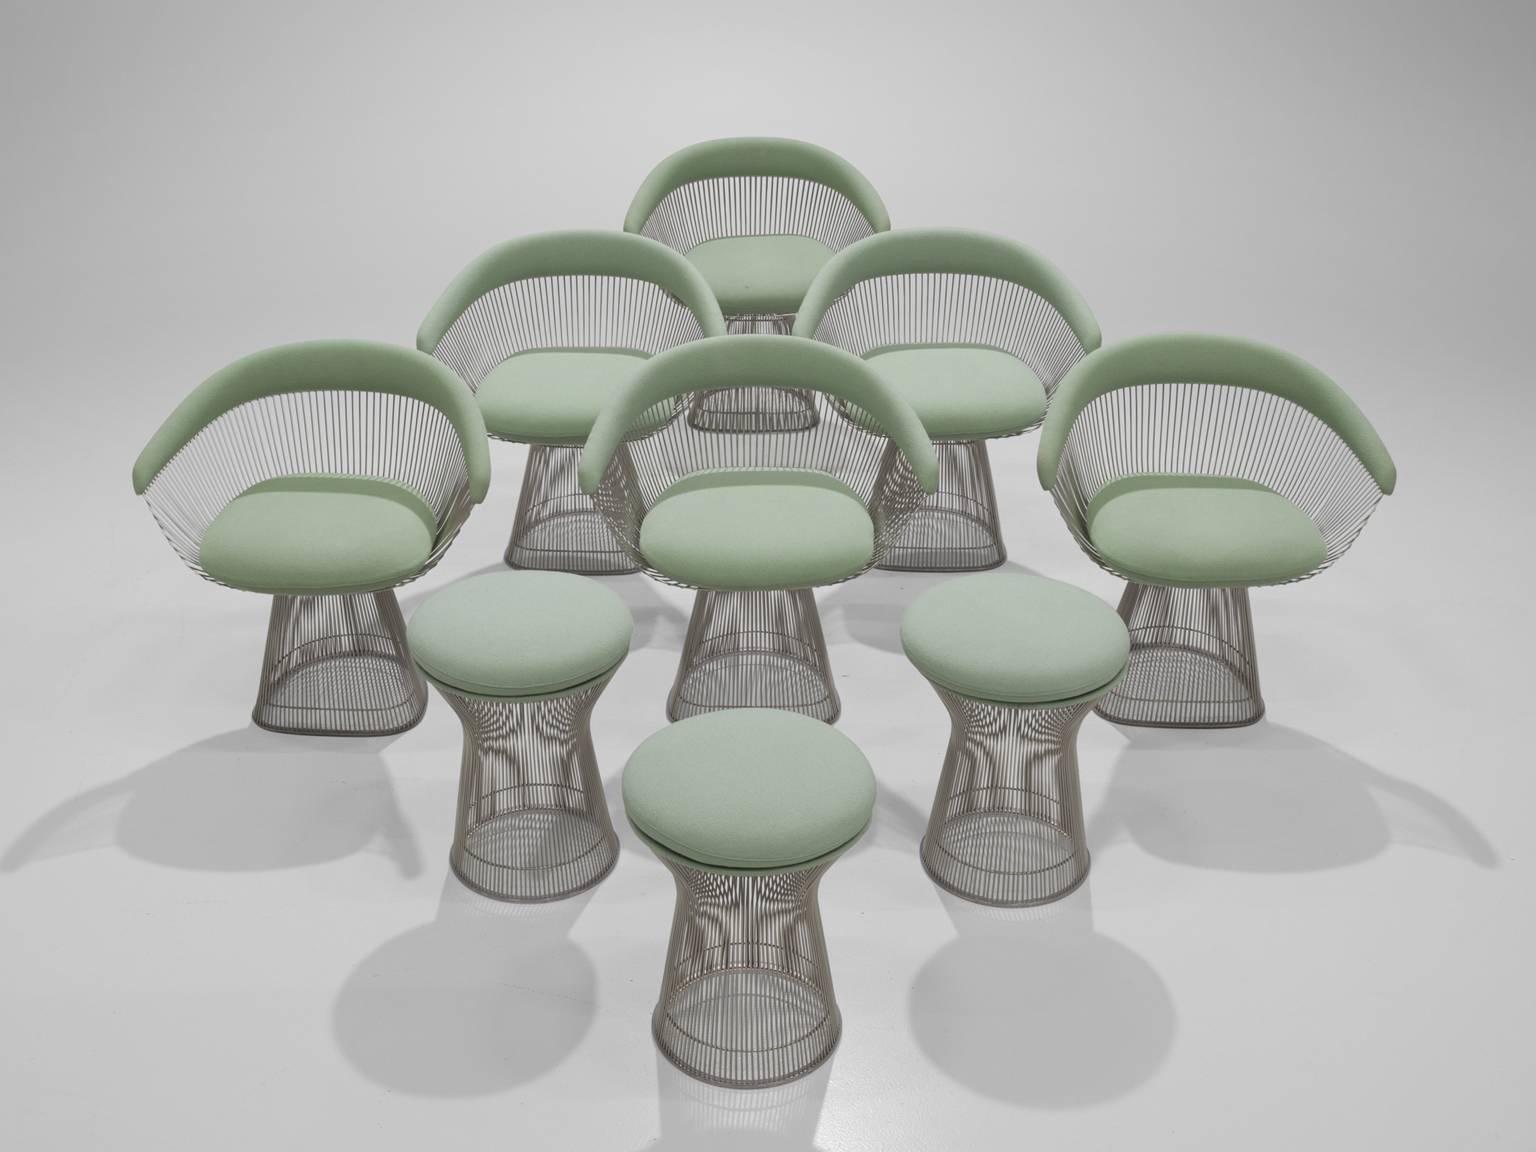 Warren Platner, seven lounge chairs and three stools in metal and fabric, 1966, United States. 

This iconic mint green set by Warren Platner (1919-2006) is created by welding curved steel rods to circular and semi-circular frames, simultaneously